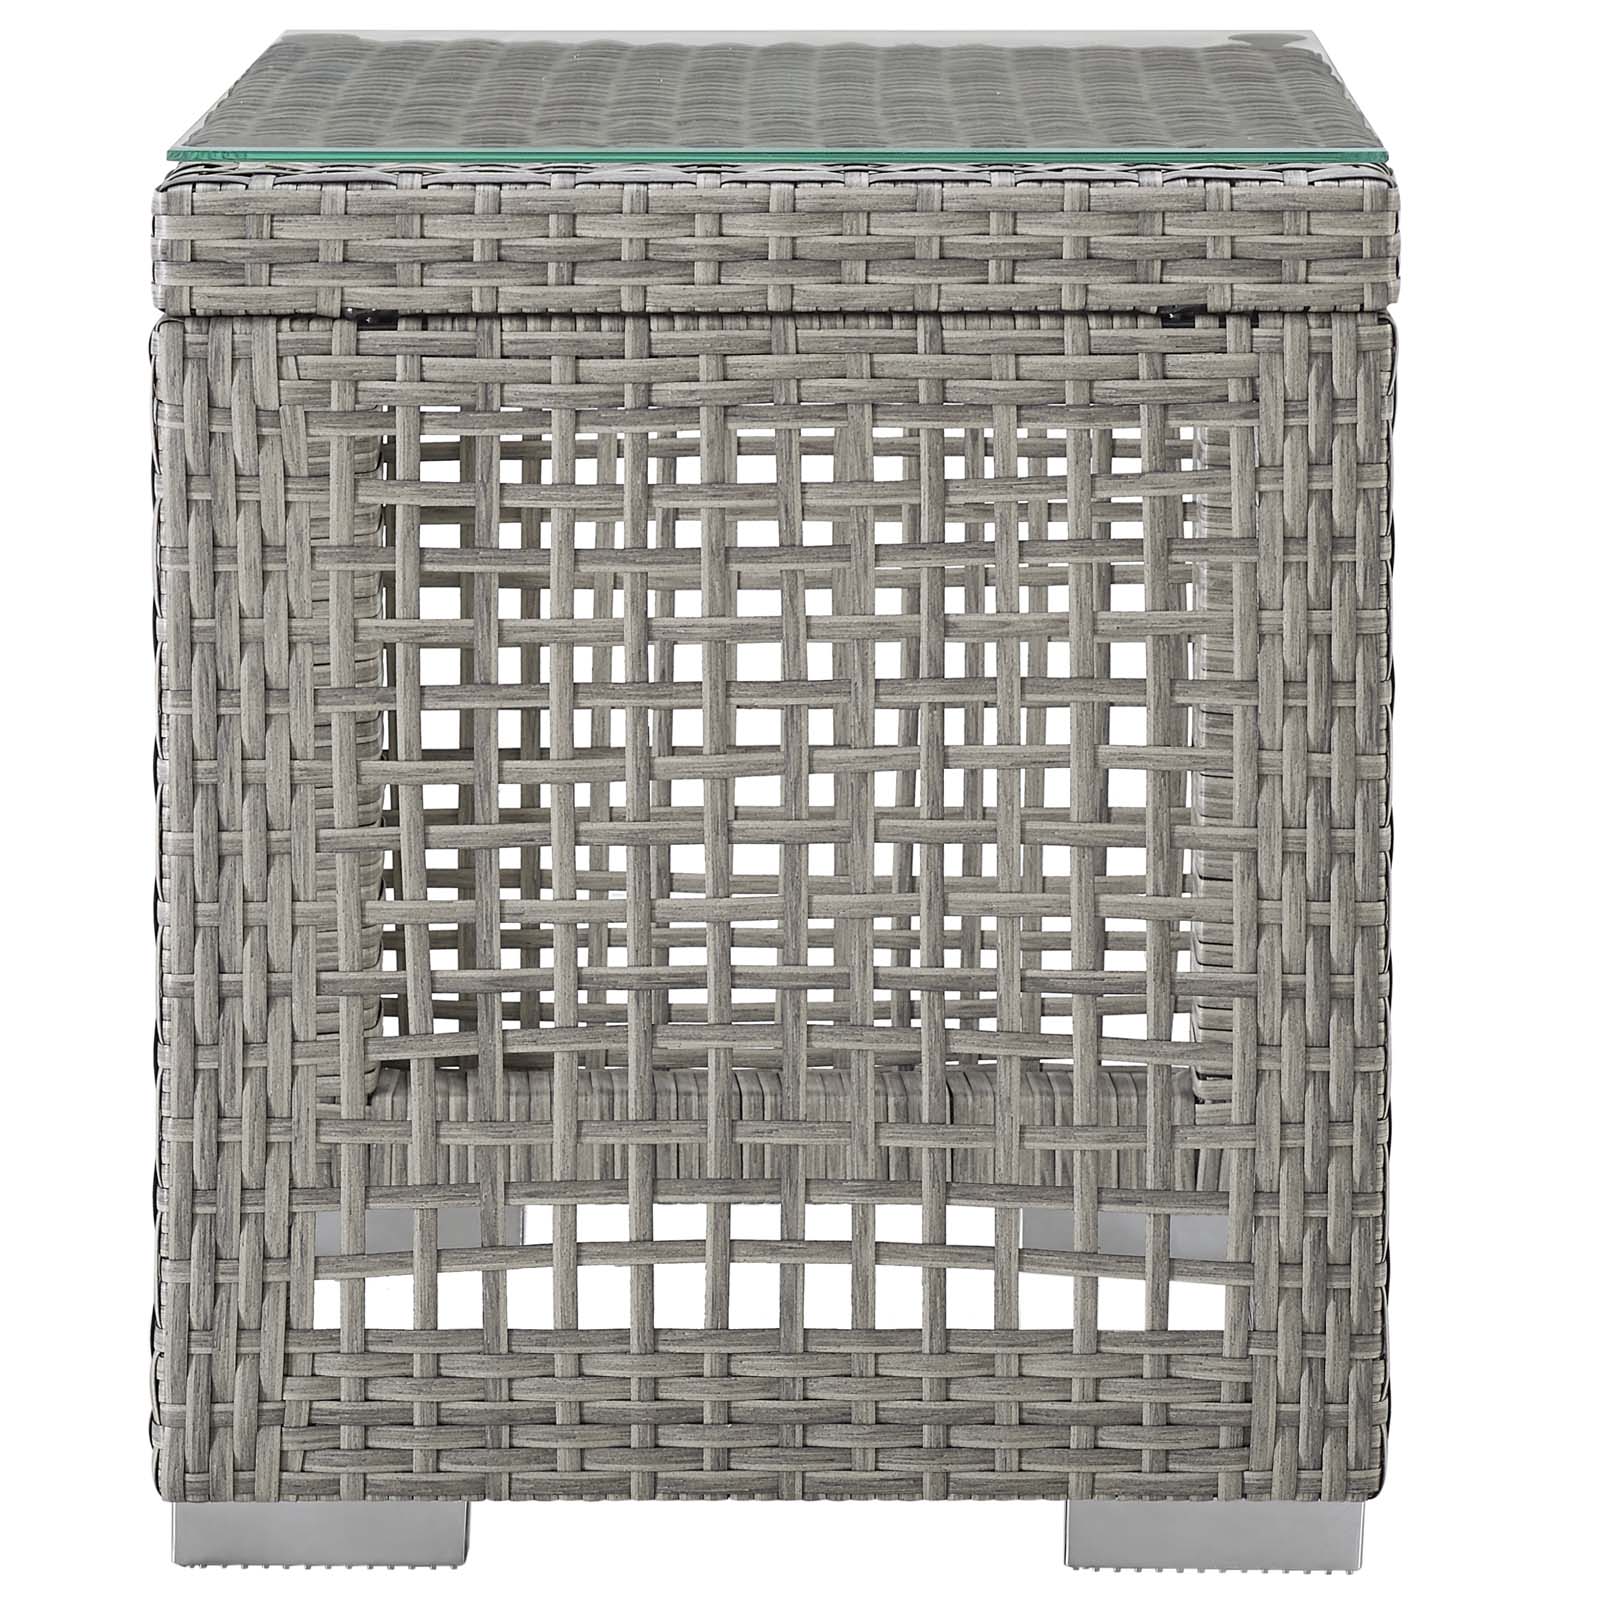 Contemporary Modern Urban Designer Outdoor Patio Balcony Garden Furniture Lounge Chair and Coffee Side Table Set, Rattan Wicker Fabric, Grey Gray White - image 3 of 8